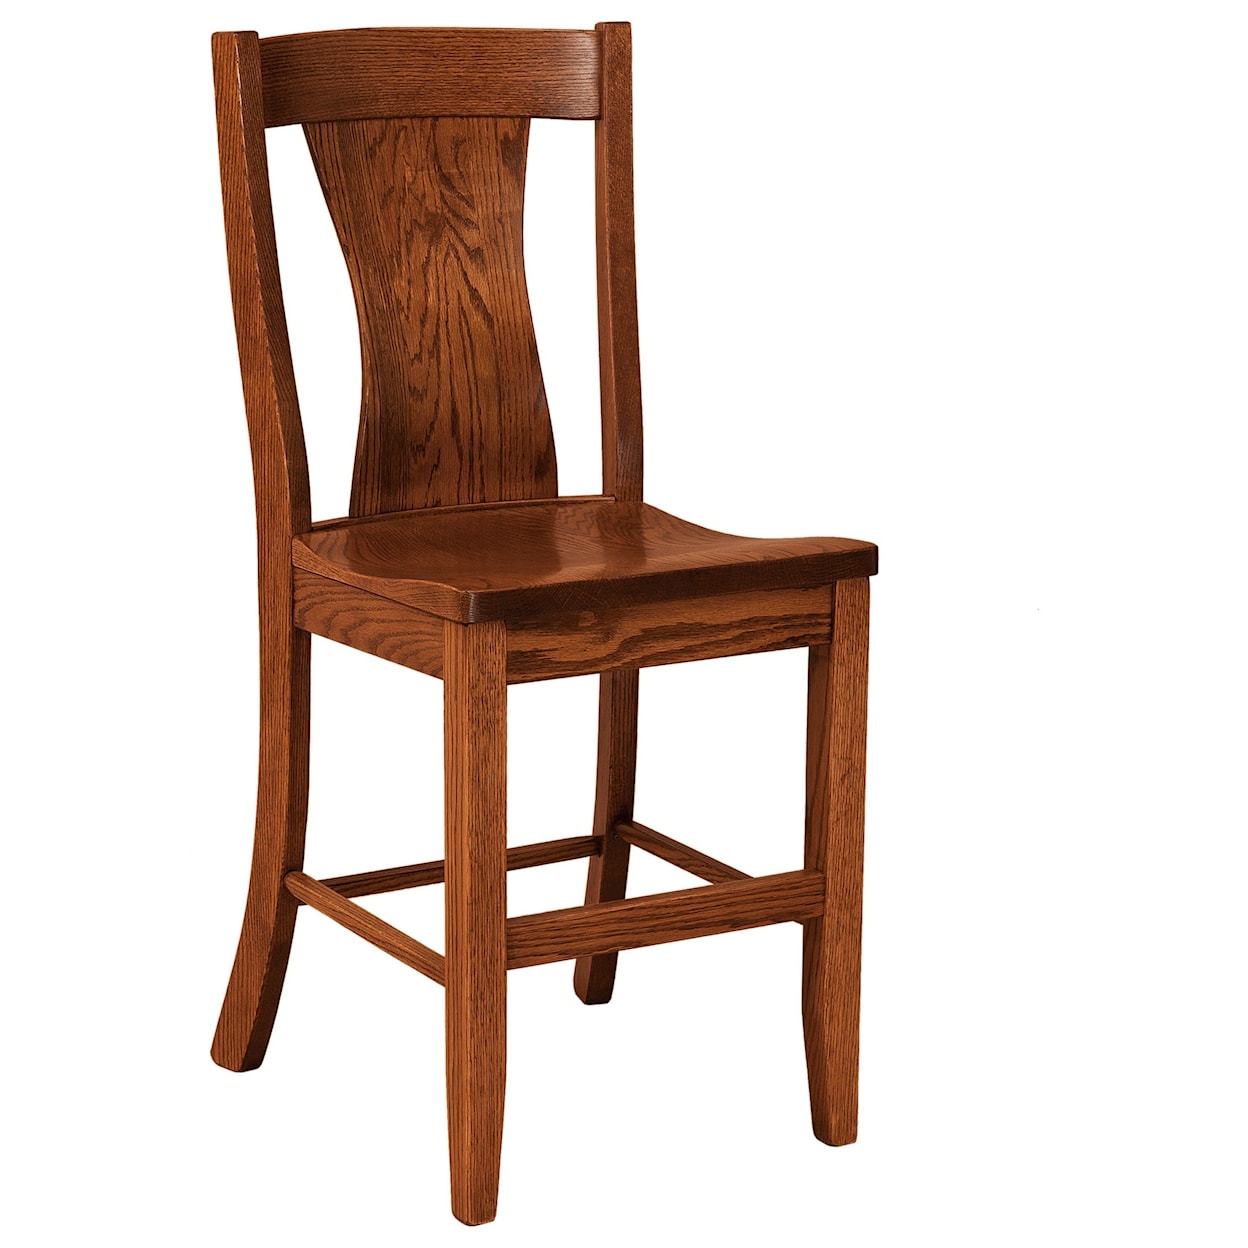 F&N Woodworking Westin Stationary Bar Height Stool - Leather Seat